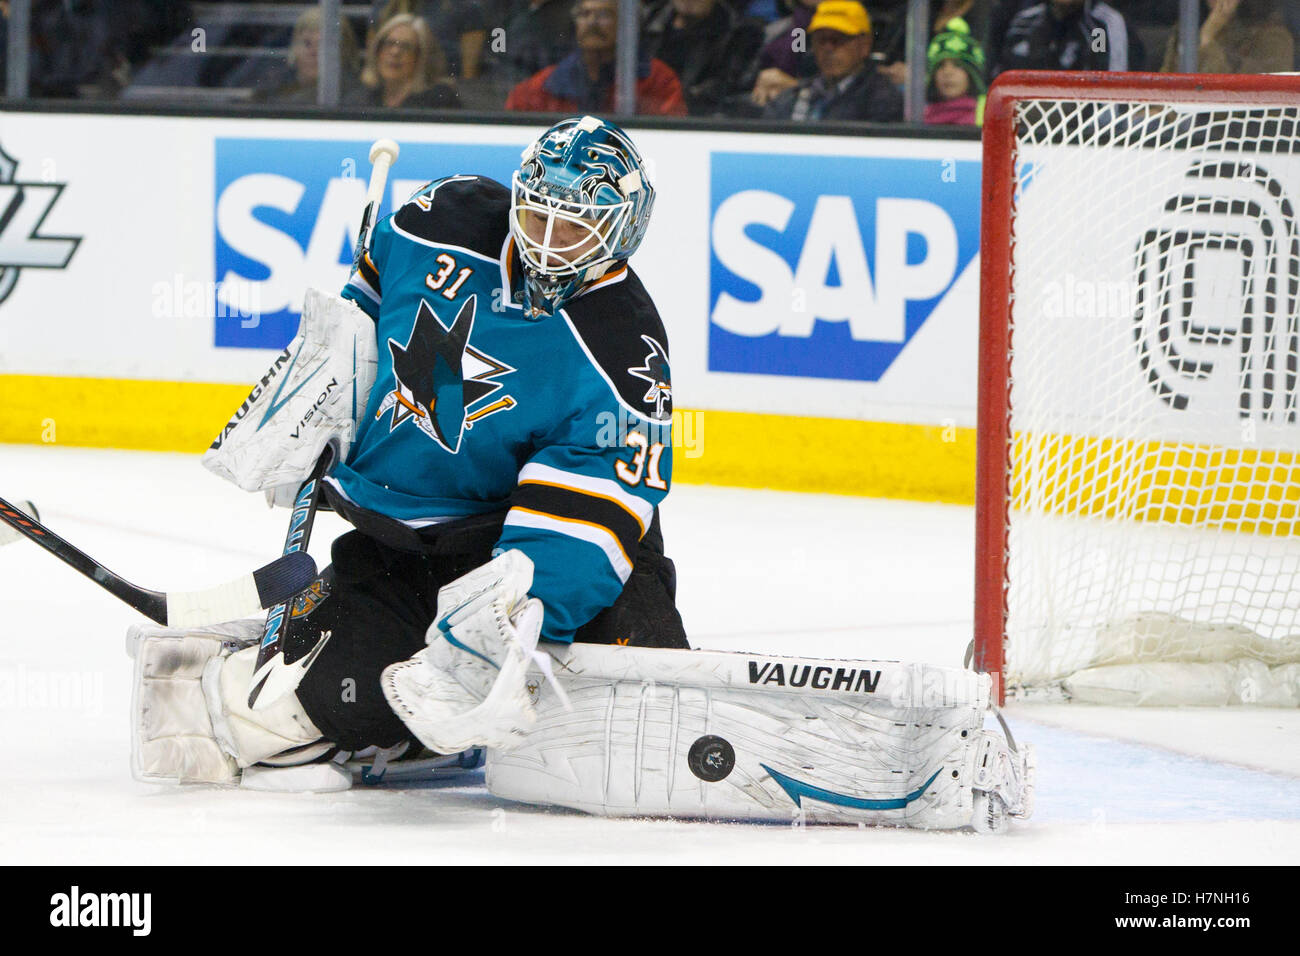 Jan 31, 2012; San Jose, CA, USA; San Jose Sharks goalie Antti Niemi (31) saves a shot against the Columbus Blue Jackets during the first period at HP Pavilion. Stock Photo